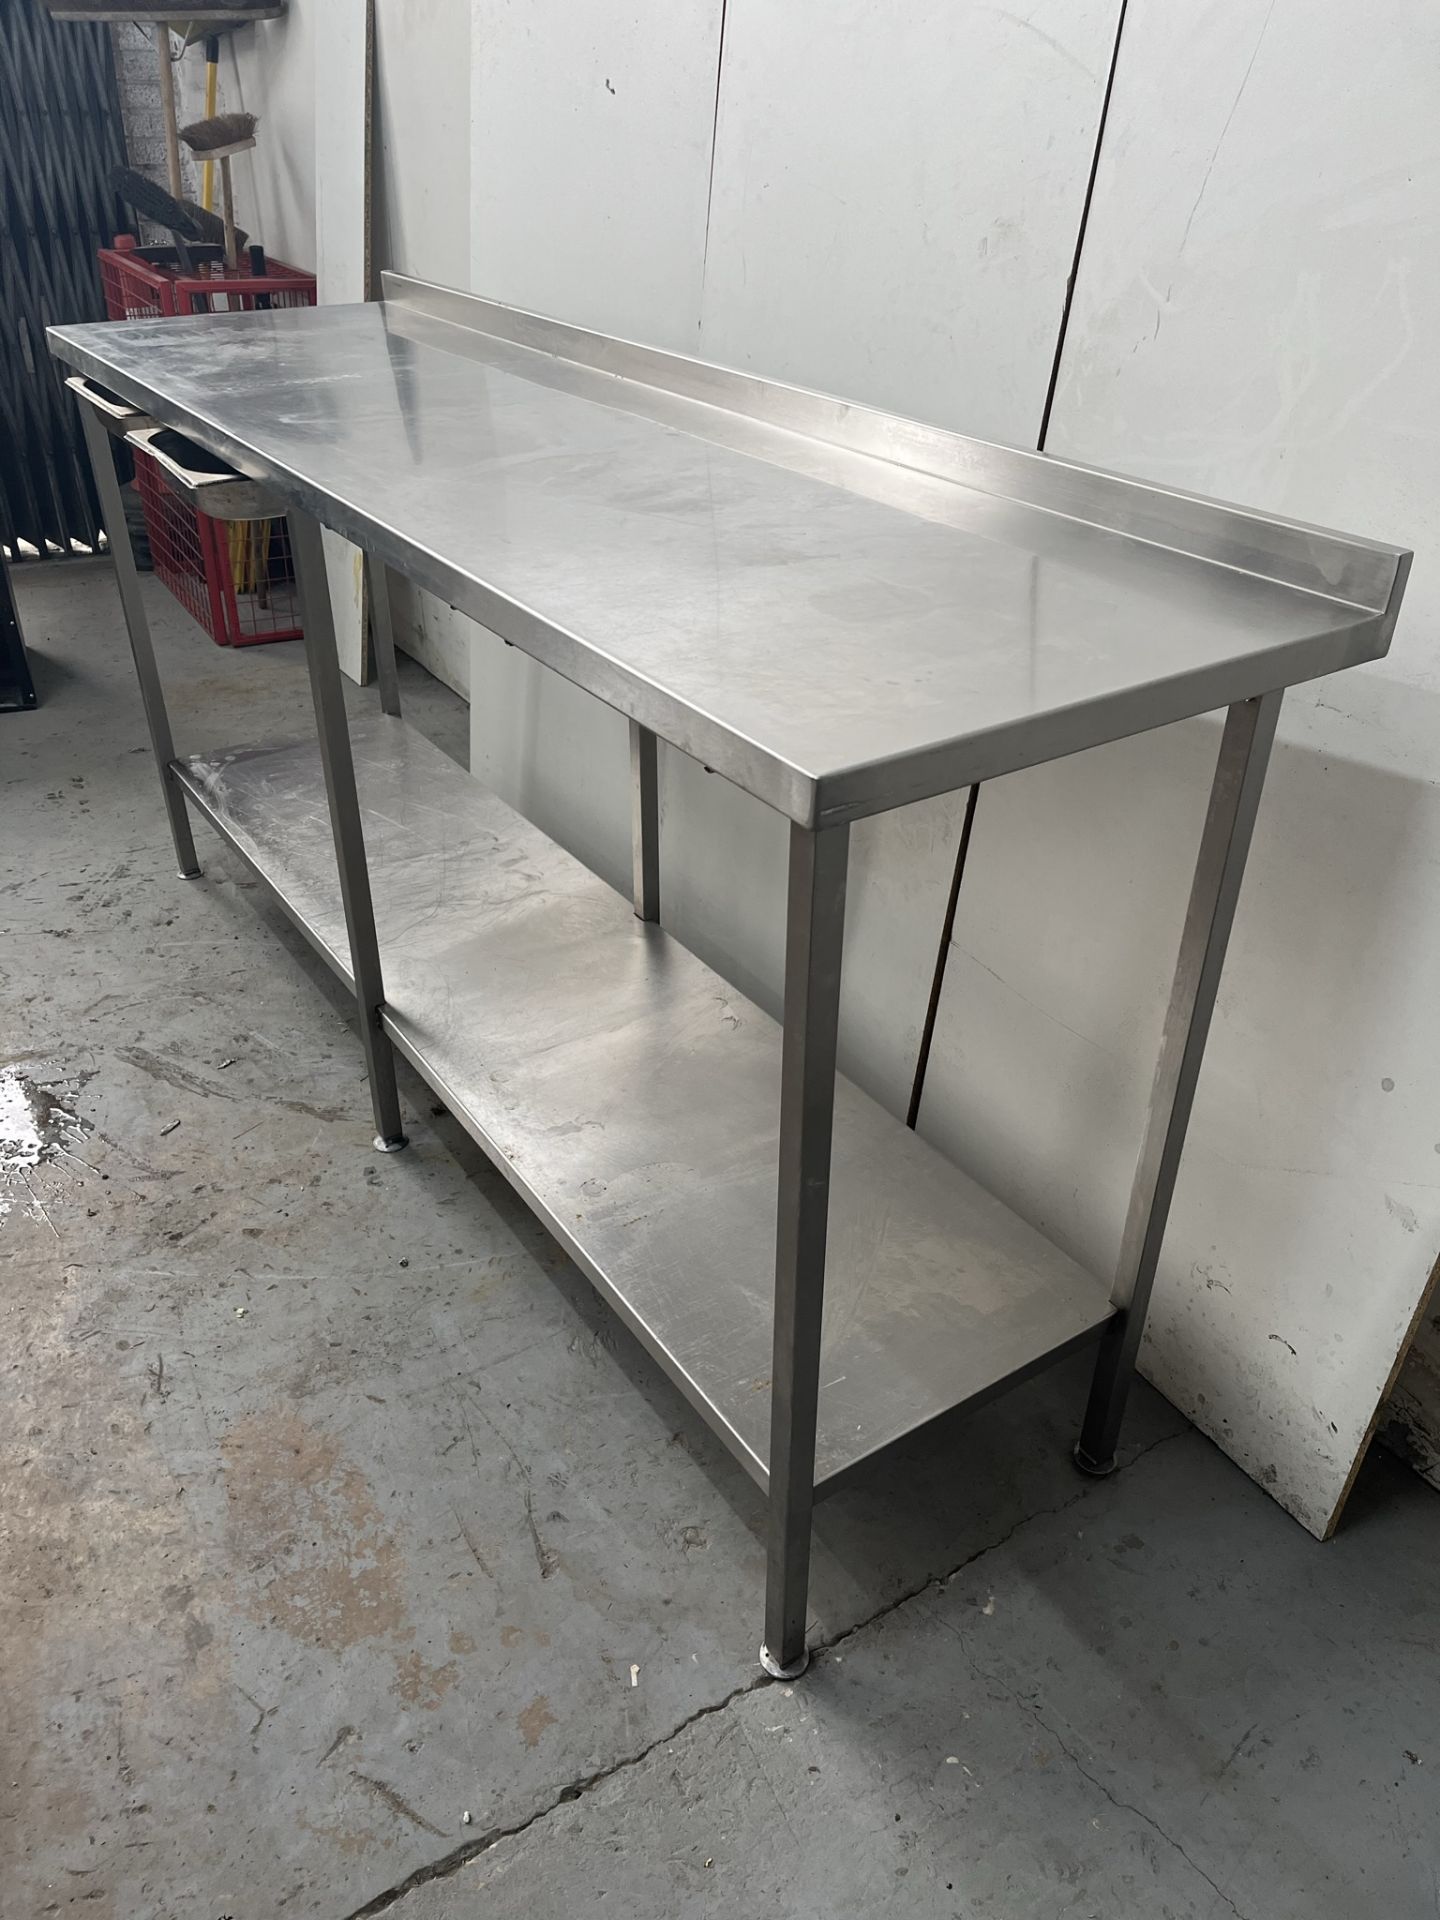 Commercial Stainless Steel Catering Table With Bottom Shelf & Trays - Image 5 of 14